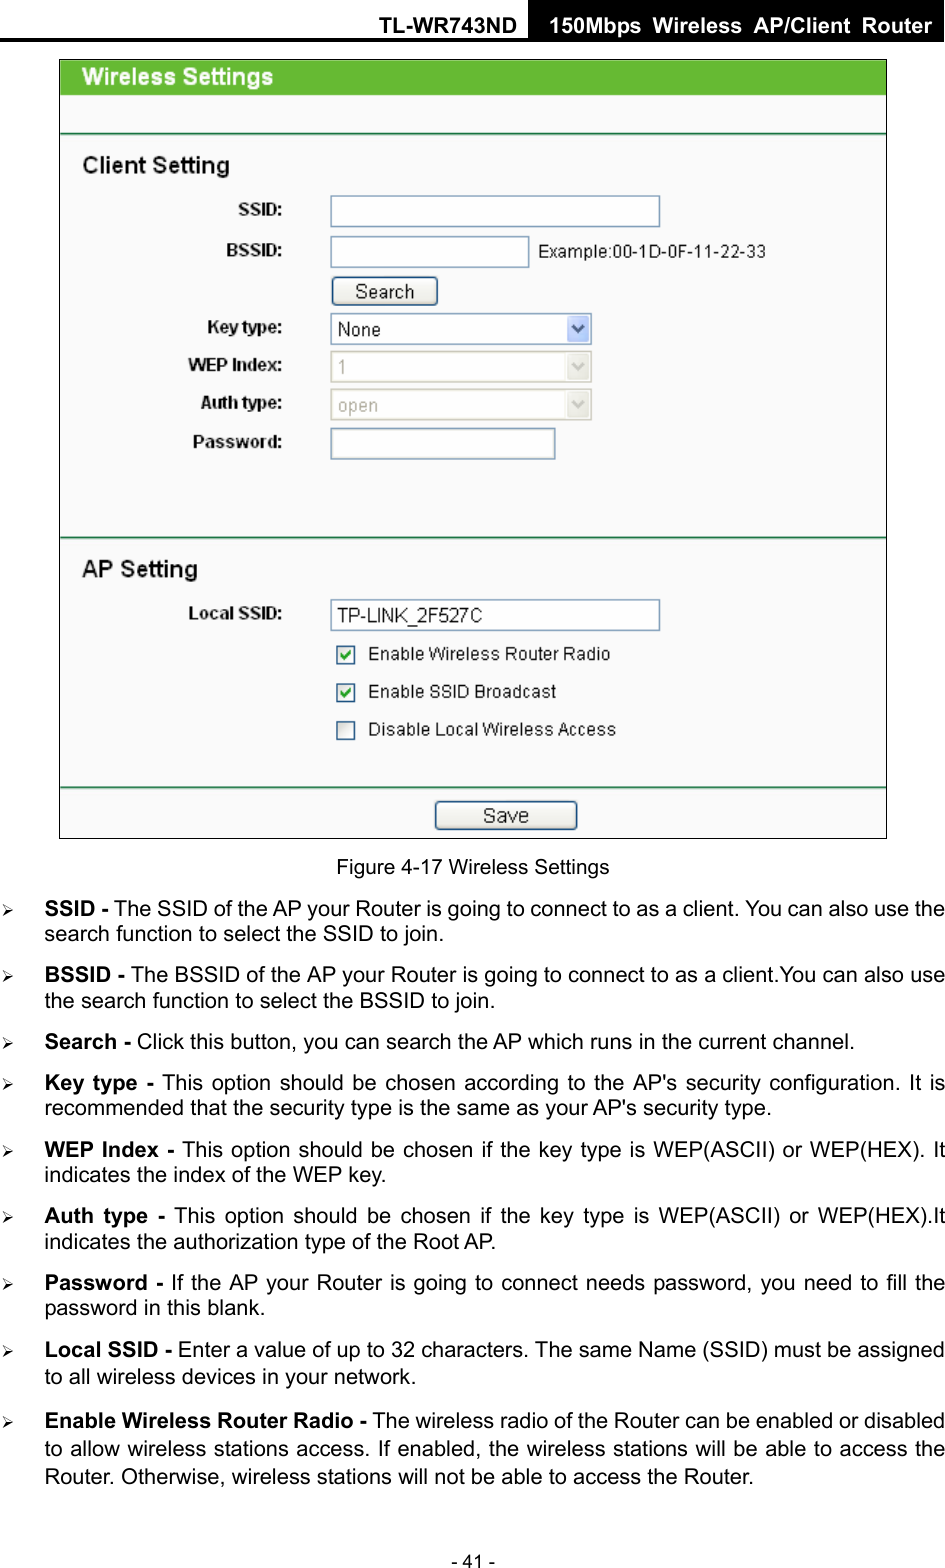 TL-WR743ND 150Mbps Wireless AP/Client Router - 41 -  Figure 4-17 Wireless Settings ¾ SSID - The SSID of the AP your Router is going to connect to as a client. You can also use the search function to select the SSID to join. ¾ BSSID - The BSSID of the AP your Router is going to connect to as a client.You can also use the search function to select the BSSID to join. ¾ Search - Click this button, you can search the AP which runs in the current channel. ¾ Key type - This option should be chosen according to the AP&apos;s security configuration. It is recommended that the security type is the same as your AP&apos;s security type. ¾ WEP Index - This option should be chosen if the key type is WEP(ASCII) or WEP(HEX). It indicates the index of the WEP key. ¾ Auth type - This option should be chosen if the key type is WEP(ASCII) or WEP(HEX).It indicates the authorization type of the Root AP. ¾ Password - If the AP your Router is going to connect needs password, you need to fill the password in this blank. ¾ Local SSID - Enter a value of up to 32 characters. The same Name (SSID) must be assigned to all wireless devices in your network. ¾ Enable Wireless Router Radio - The wireless radio of the Router can be enabled or disabled to allow wireless stations access. If enabled, the wireless stations will be able to access the Router. Otherwise, wireless stations will not be able to access the Router. 